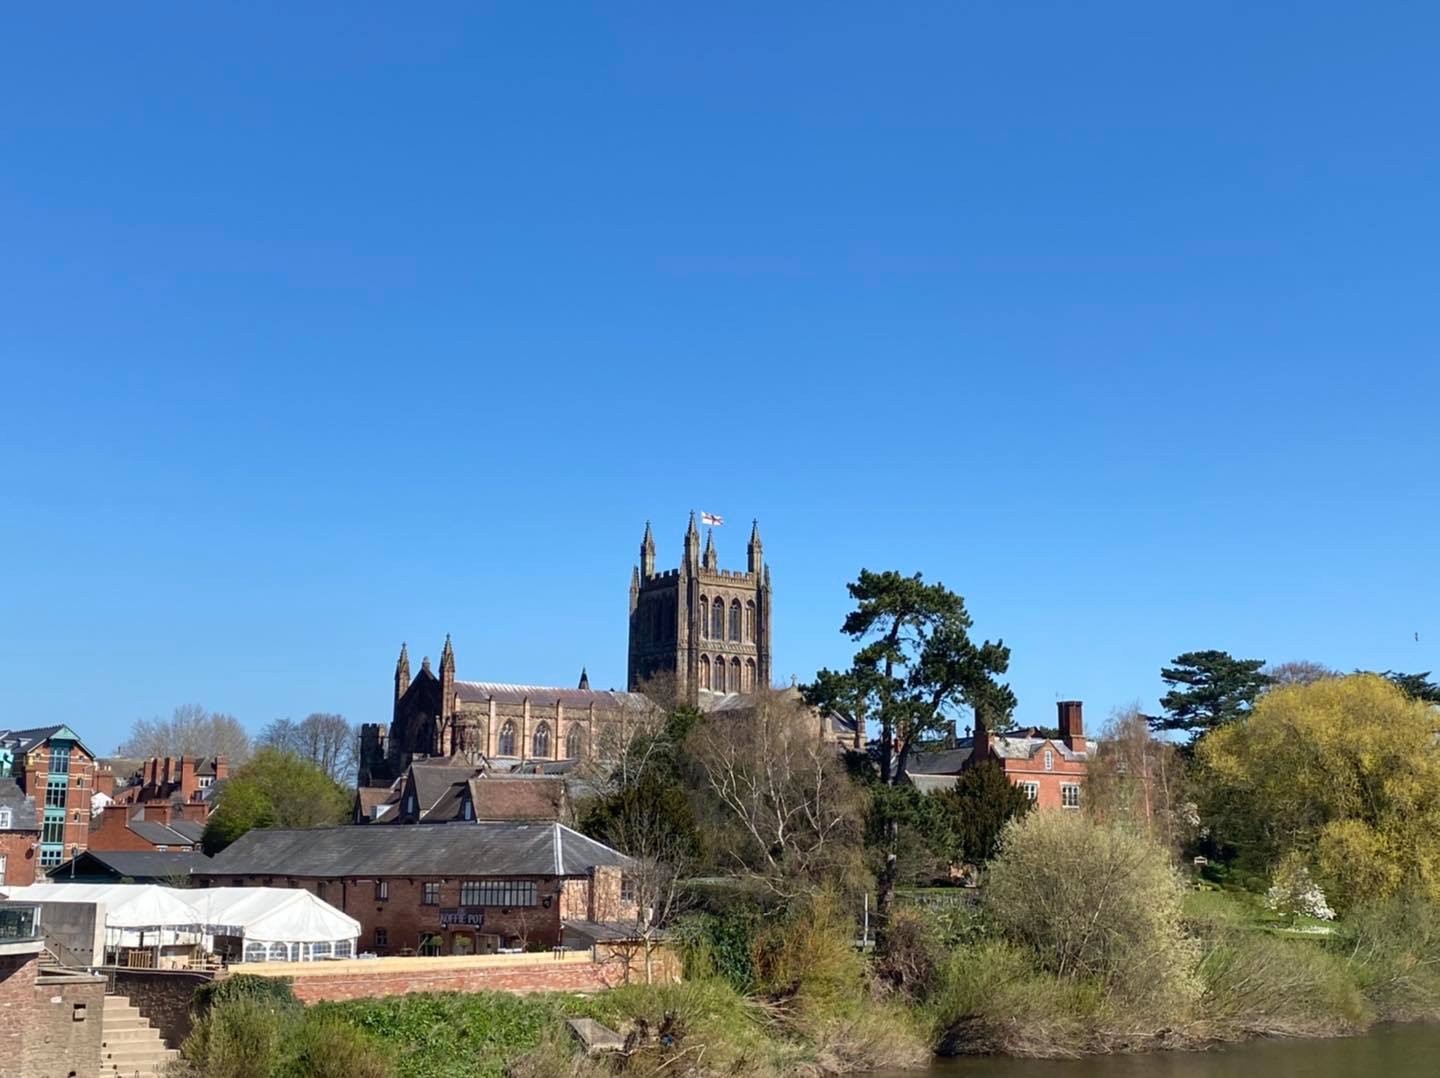 NEWS | Hereford Cathedral receives £157,400 from the Government’s Culture Recovery Fund